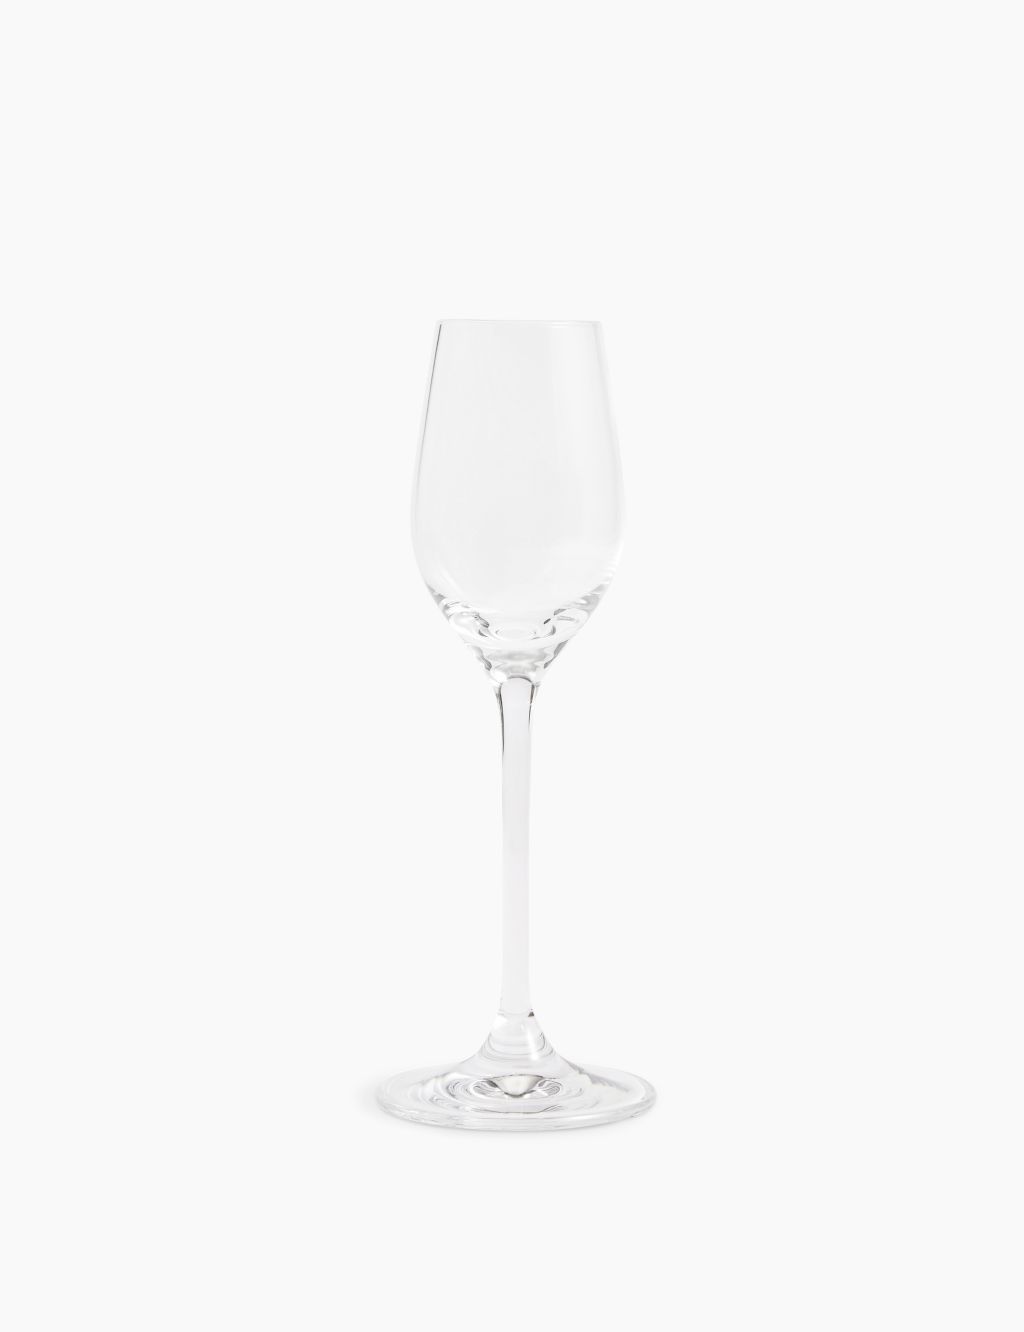 Set of 4 Sherry Glasses 2 of 4